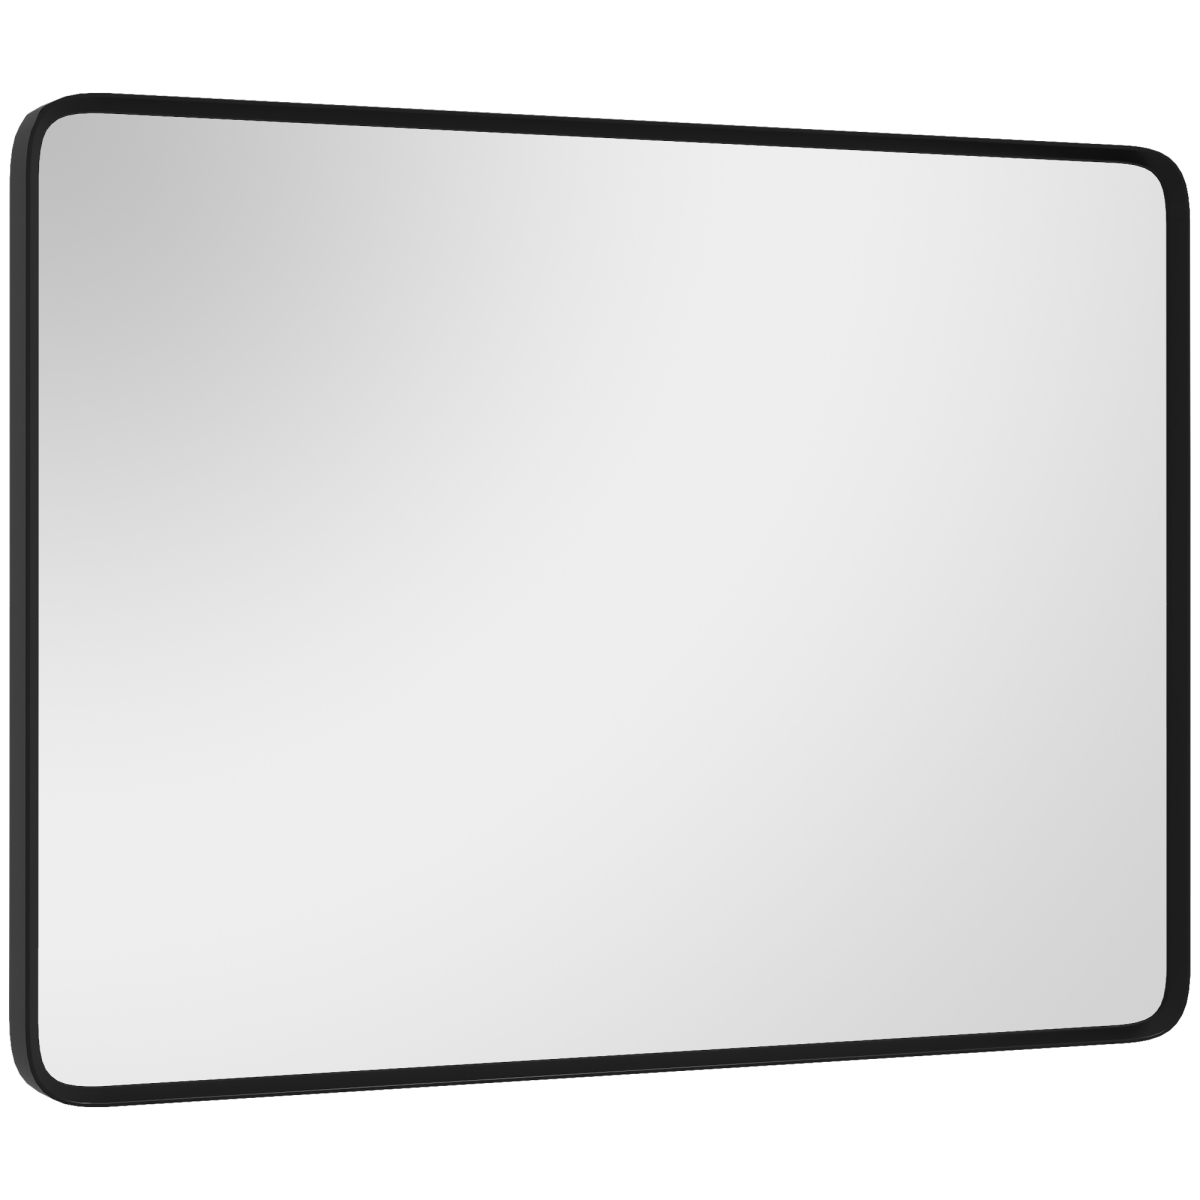 Picture of 212 Main 830-763V80CR 40 x 30 in. Homcom Wall-Mounted Living Room Rectangle Mirror